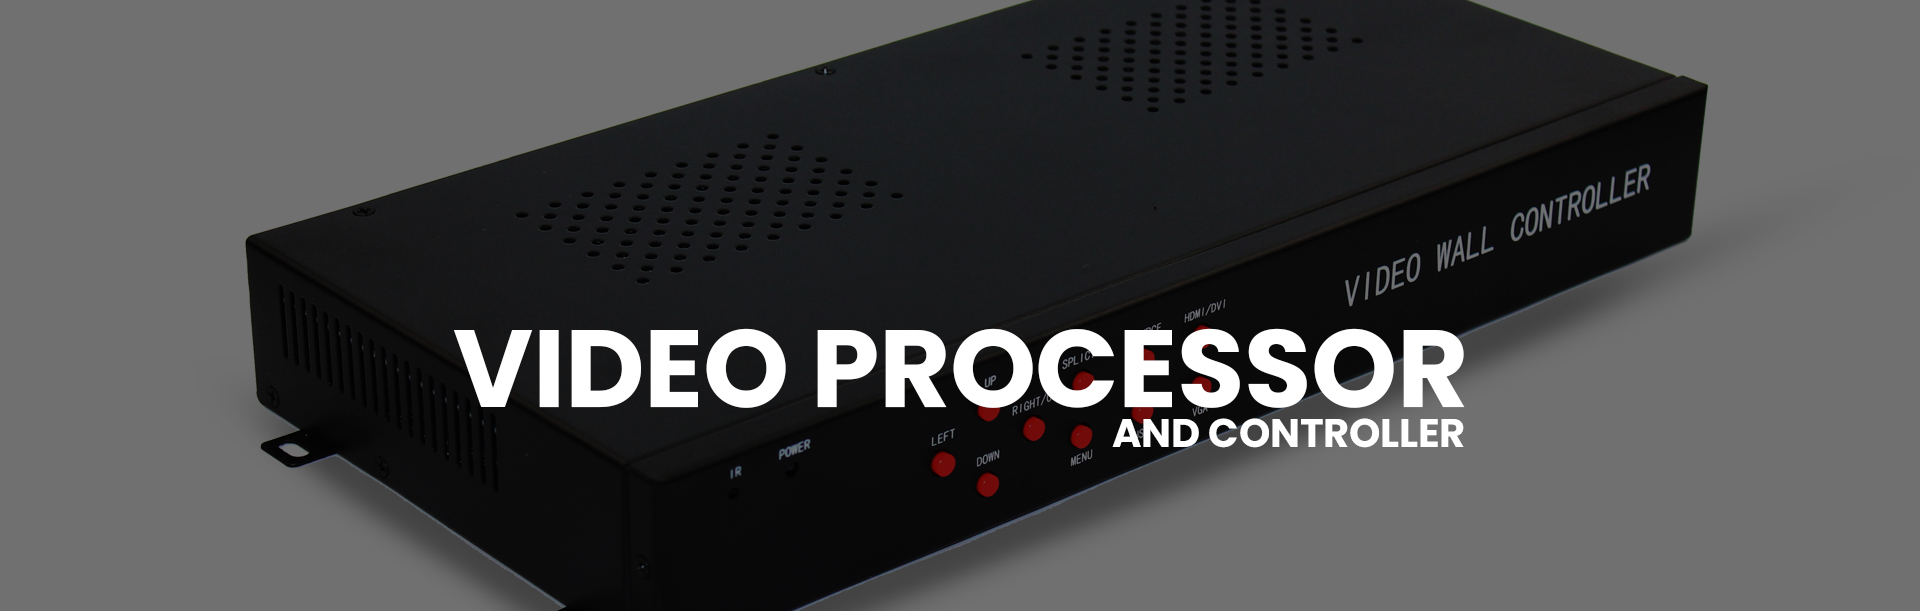 Video Processor and Controller